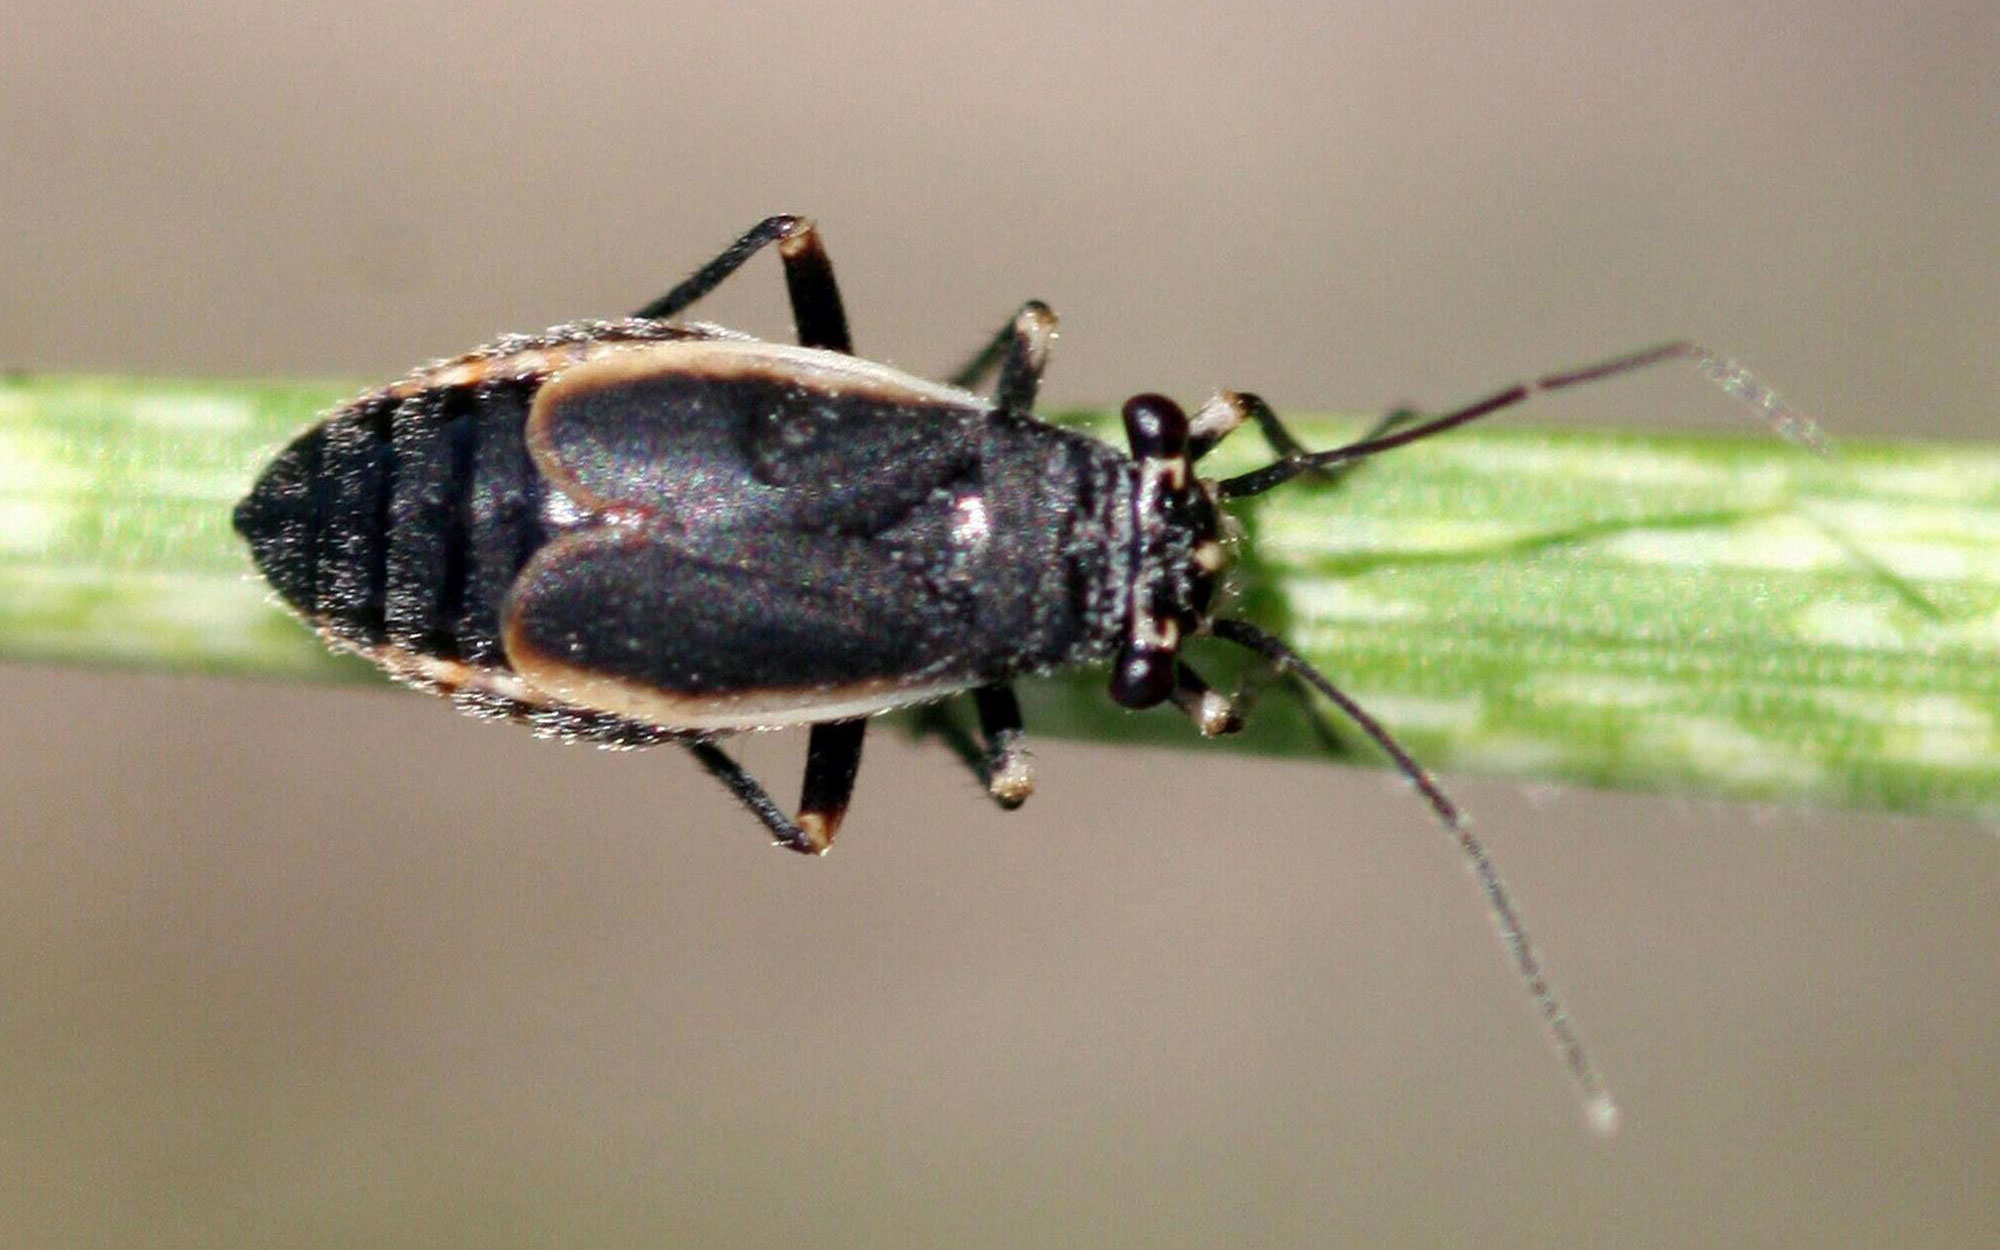 A small black bug with tan margins on the wings. This insect is resting on a blade of grass that is green with white spots.